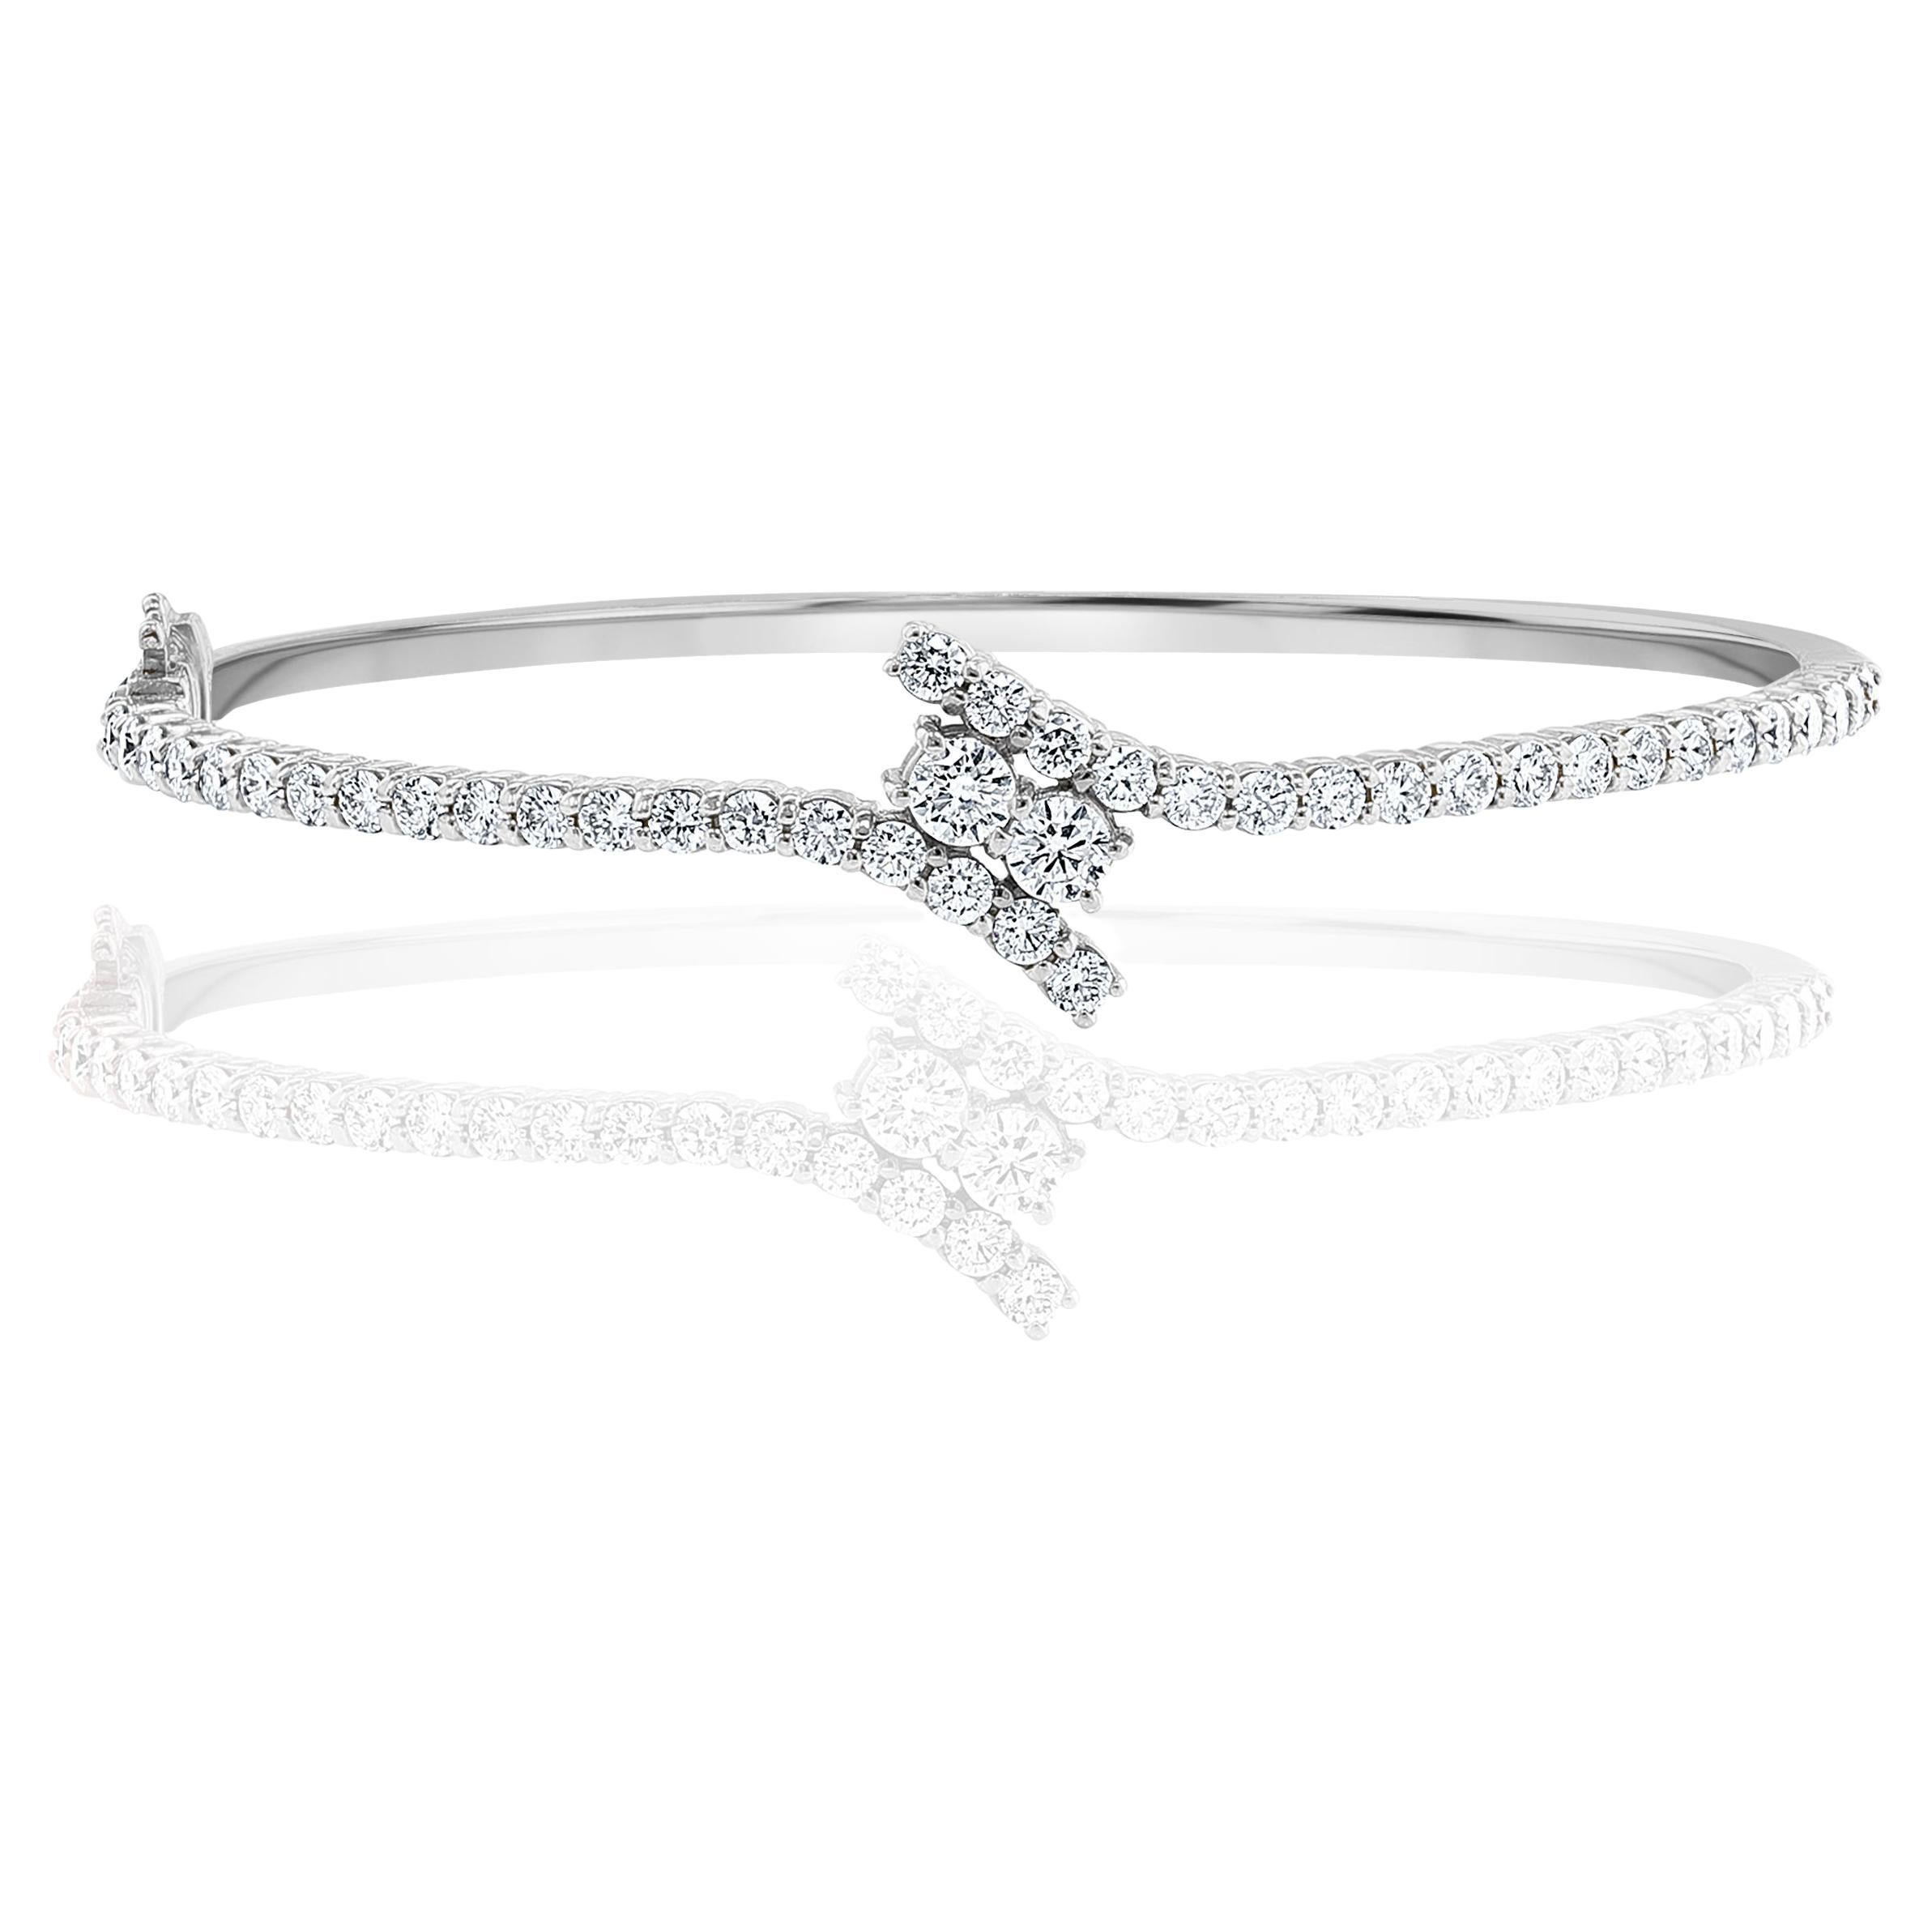 2.13 Carats Round Cut Diamond Twisted Bangle Bracelet in 14K White Gold For Sale